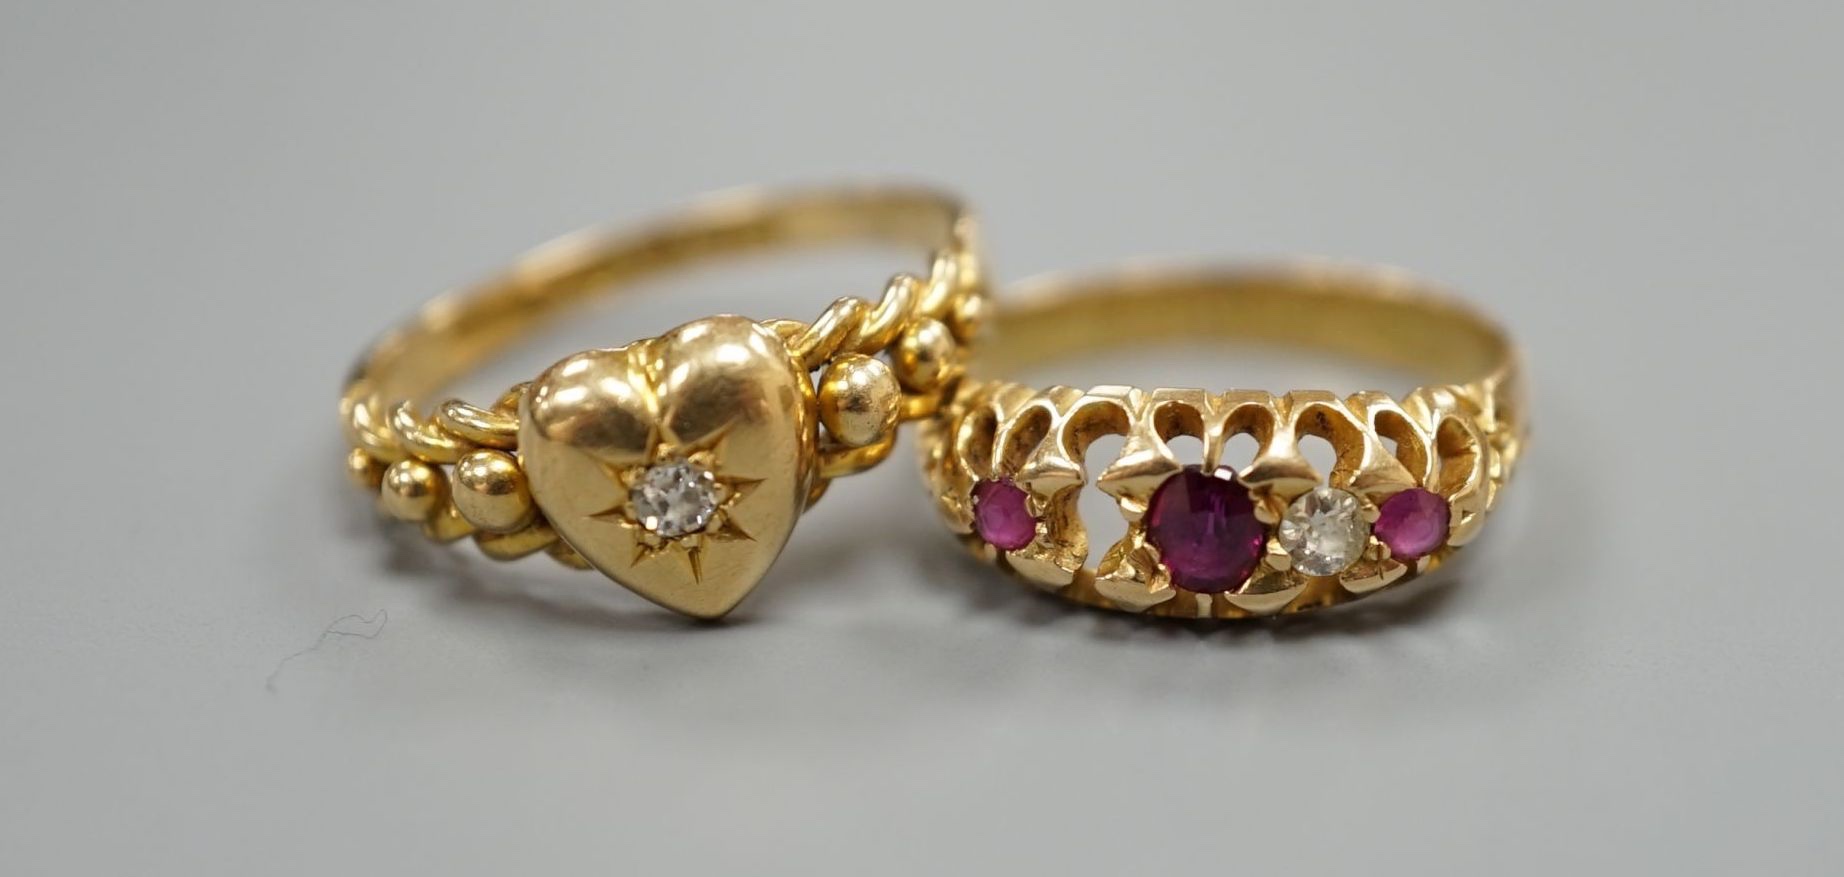 Two early 20th century 18t gold and gem set ring, including heart shape with diamond, sizes N/O and L, (stone missing), gross 5.2 grams.